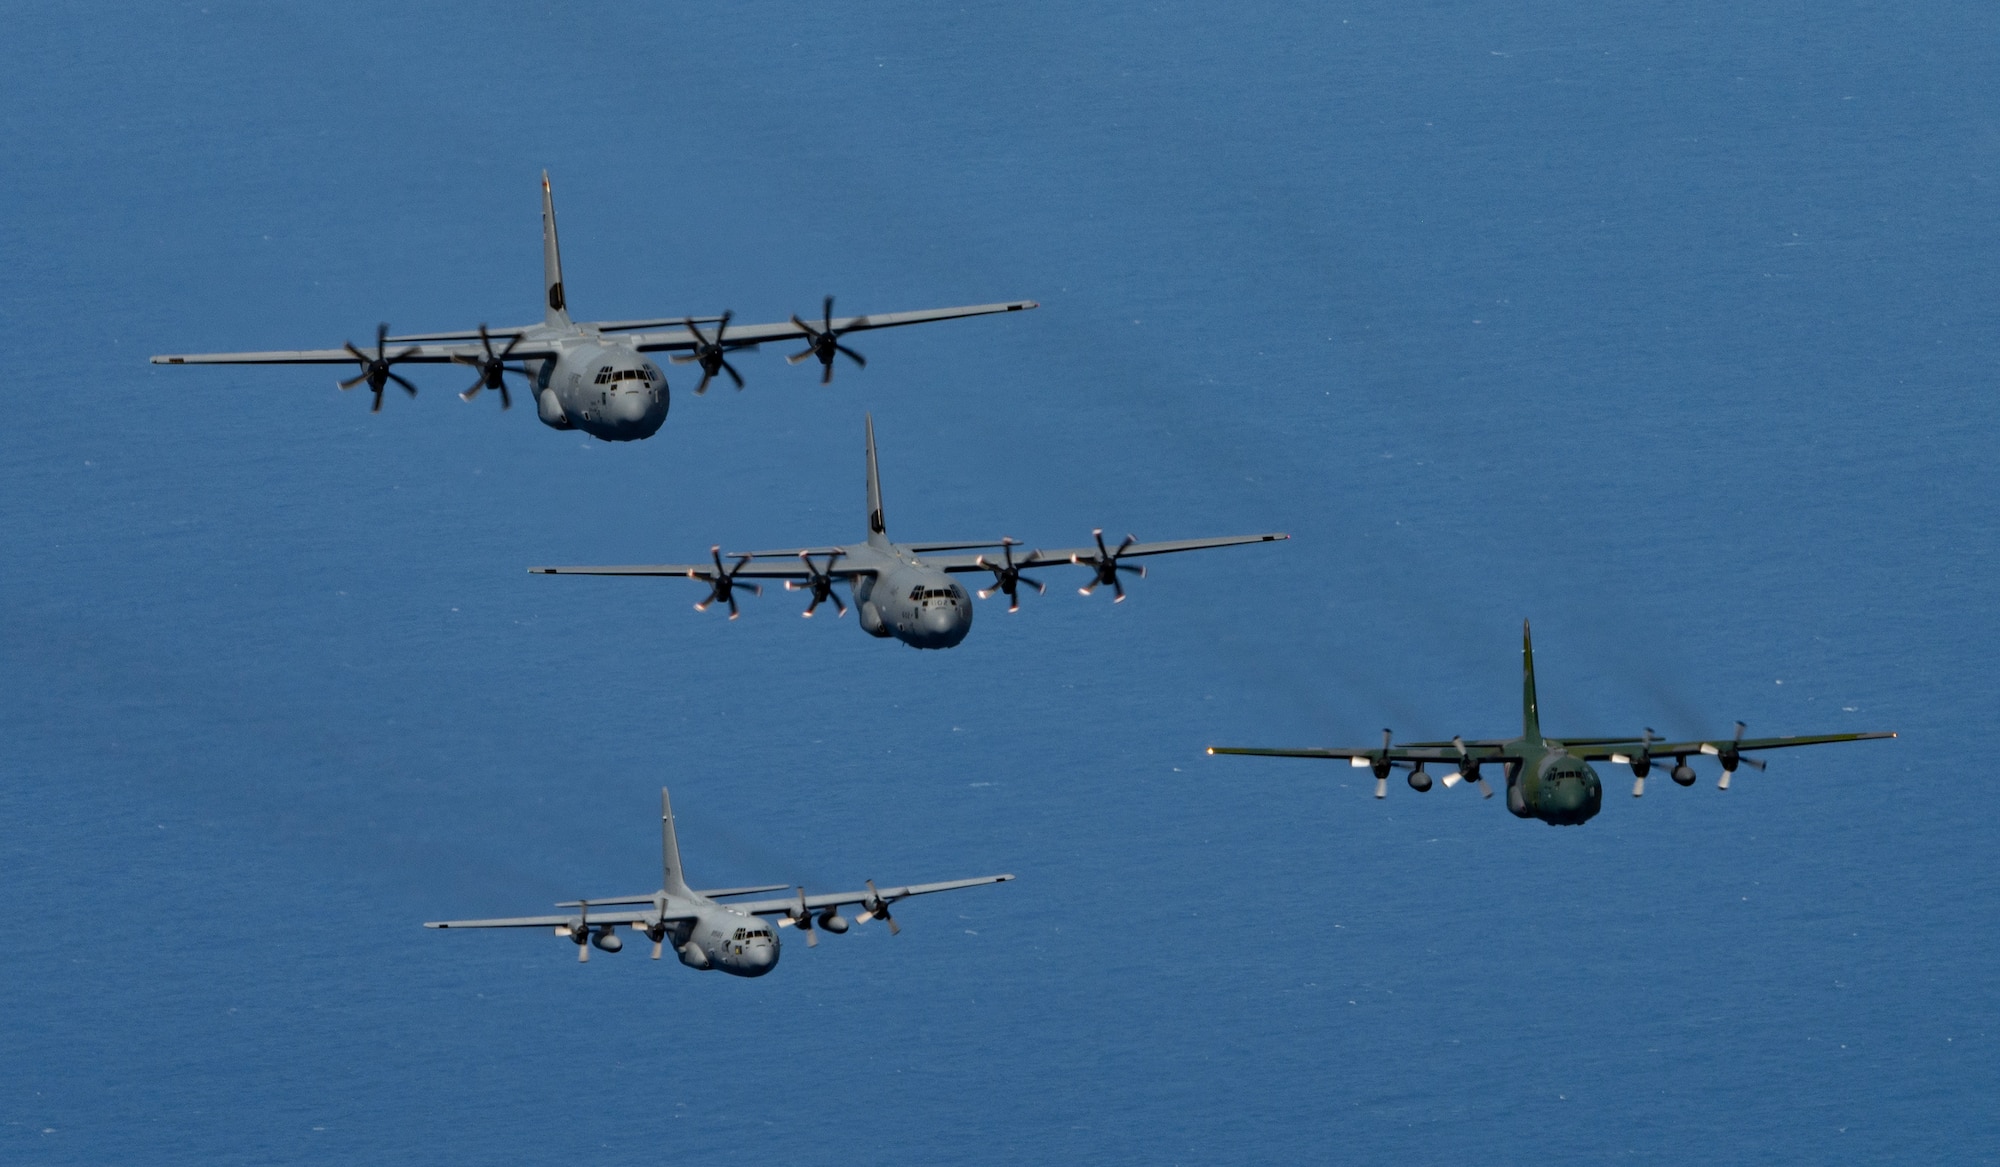 Photo of Cargo aircraft from Japan, U.S., Canada, and the Republic of Korea flying together over the Pacific.